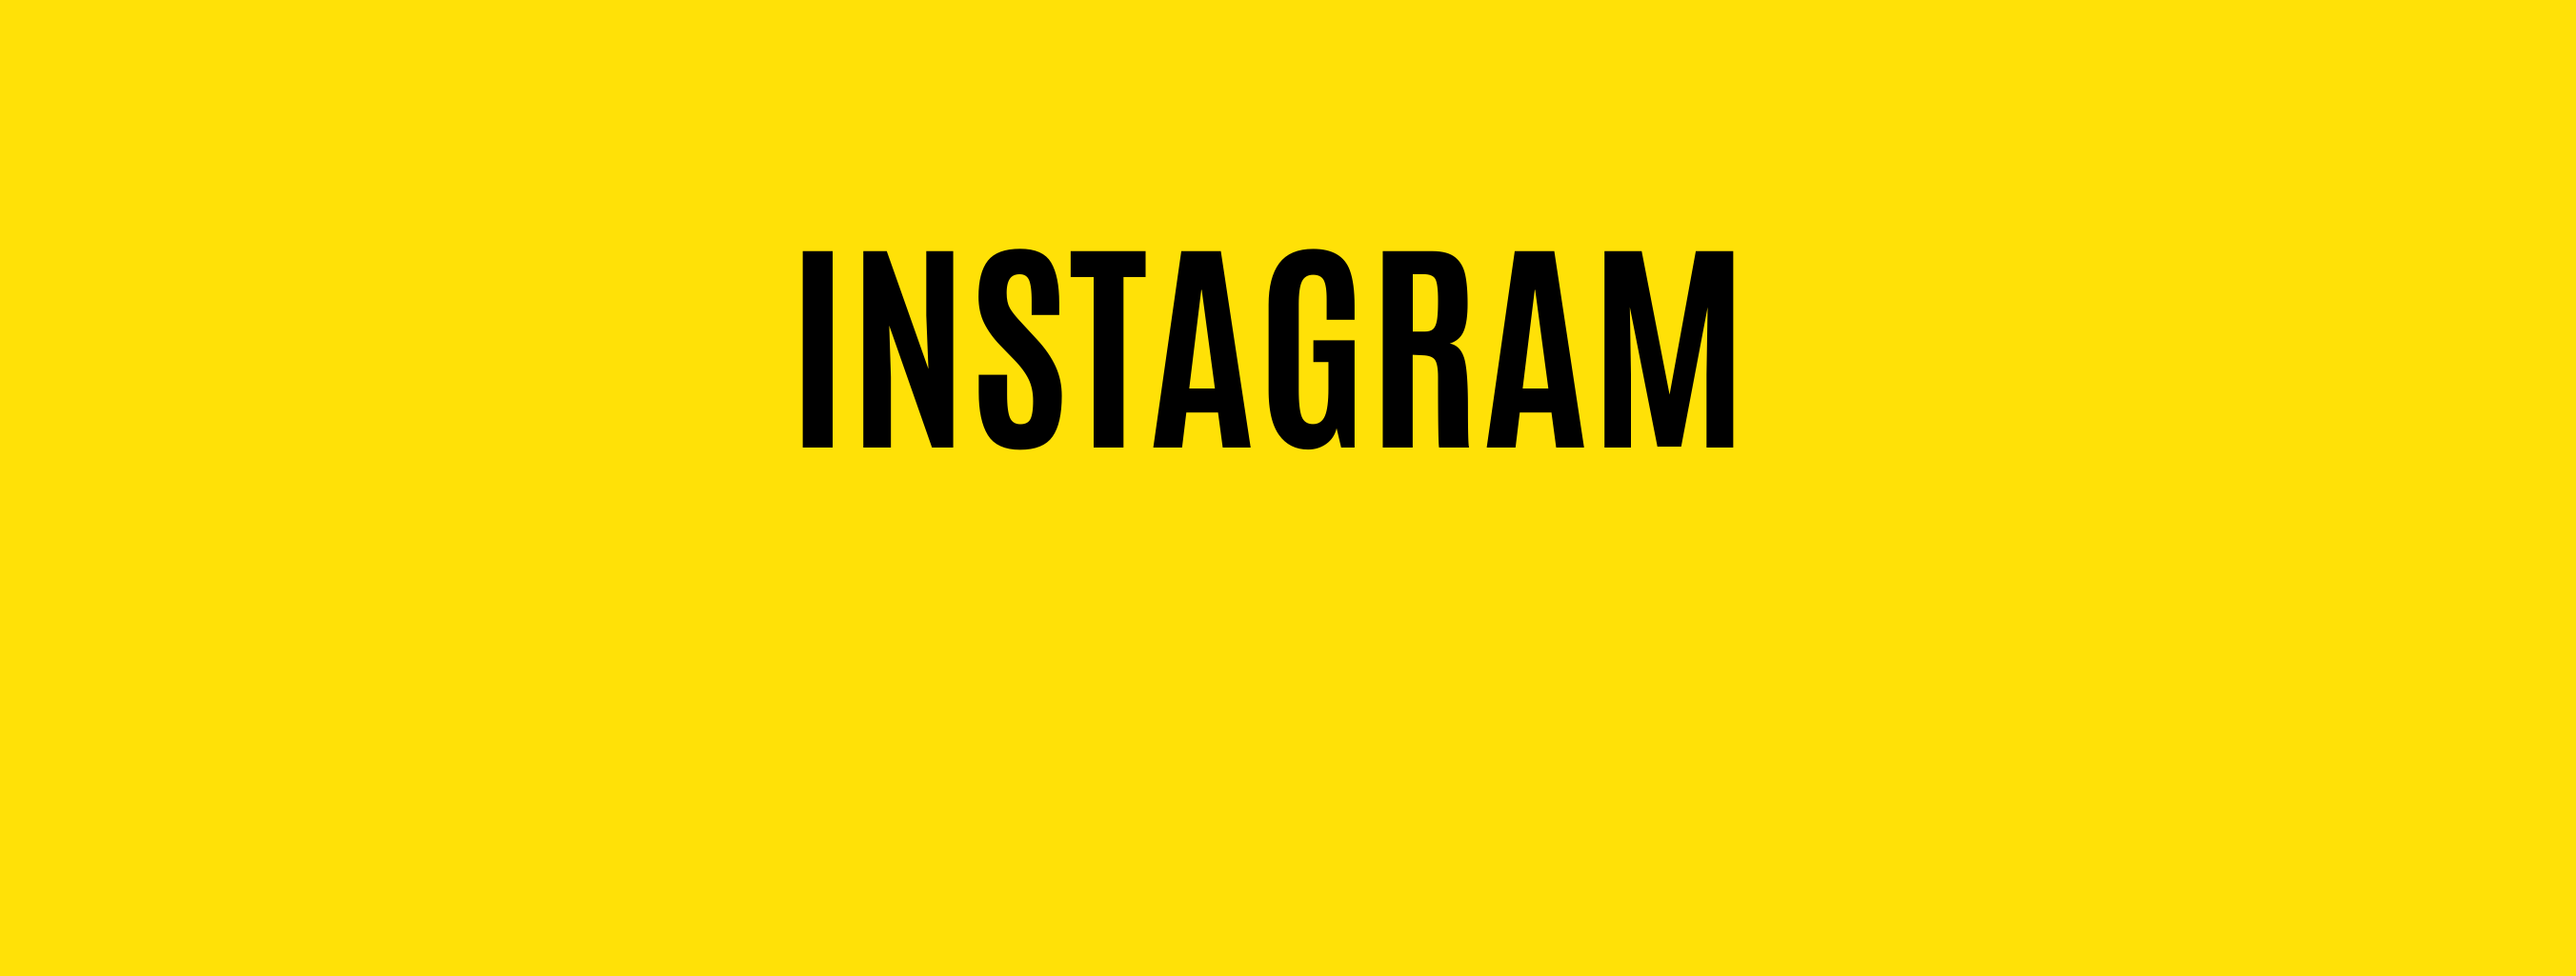 Instagram specialists and manager, social media marketing from USource Digital Inc.